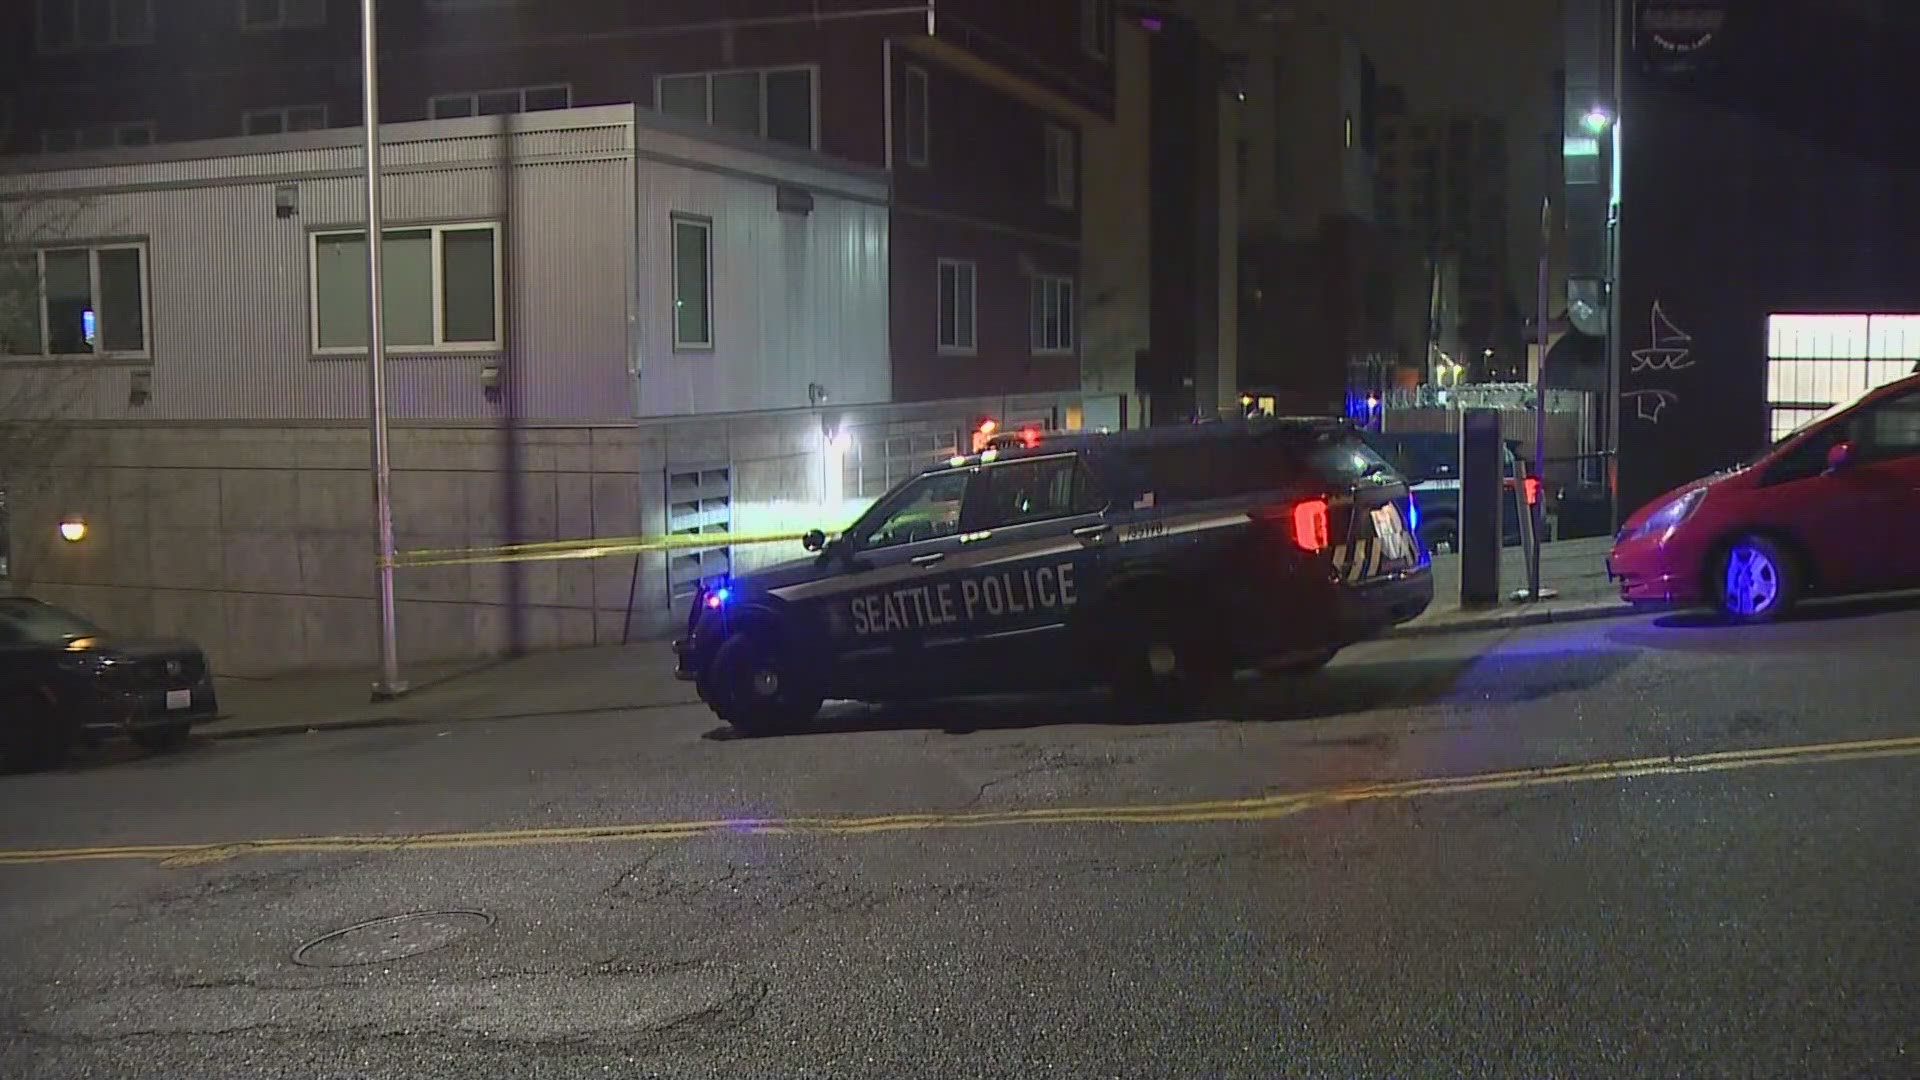 Seattle police are investigating after a woman was shot and killed outside a Belltown music venue early Sunday morning.